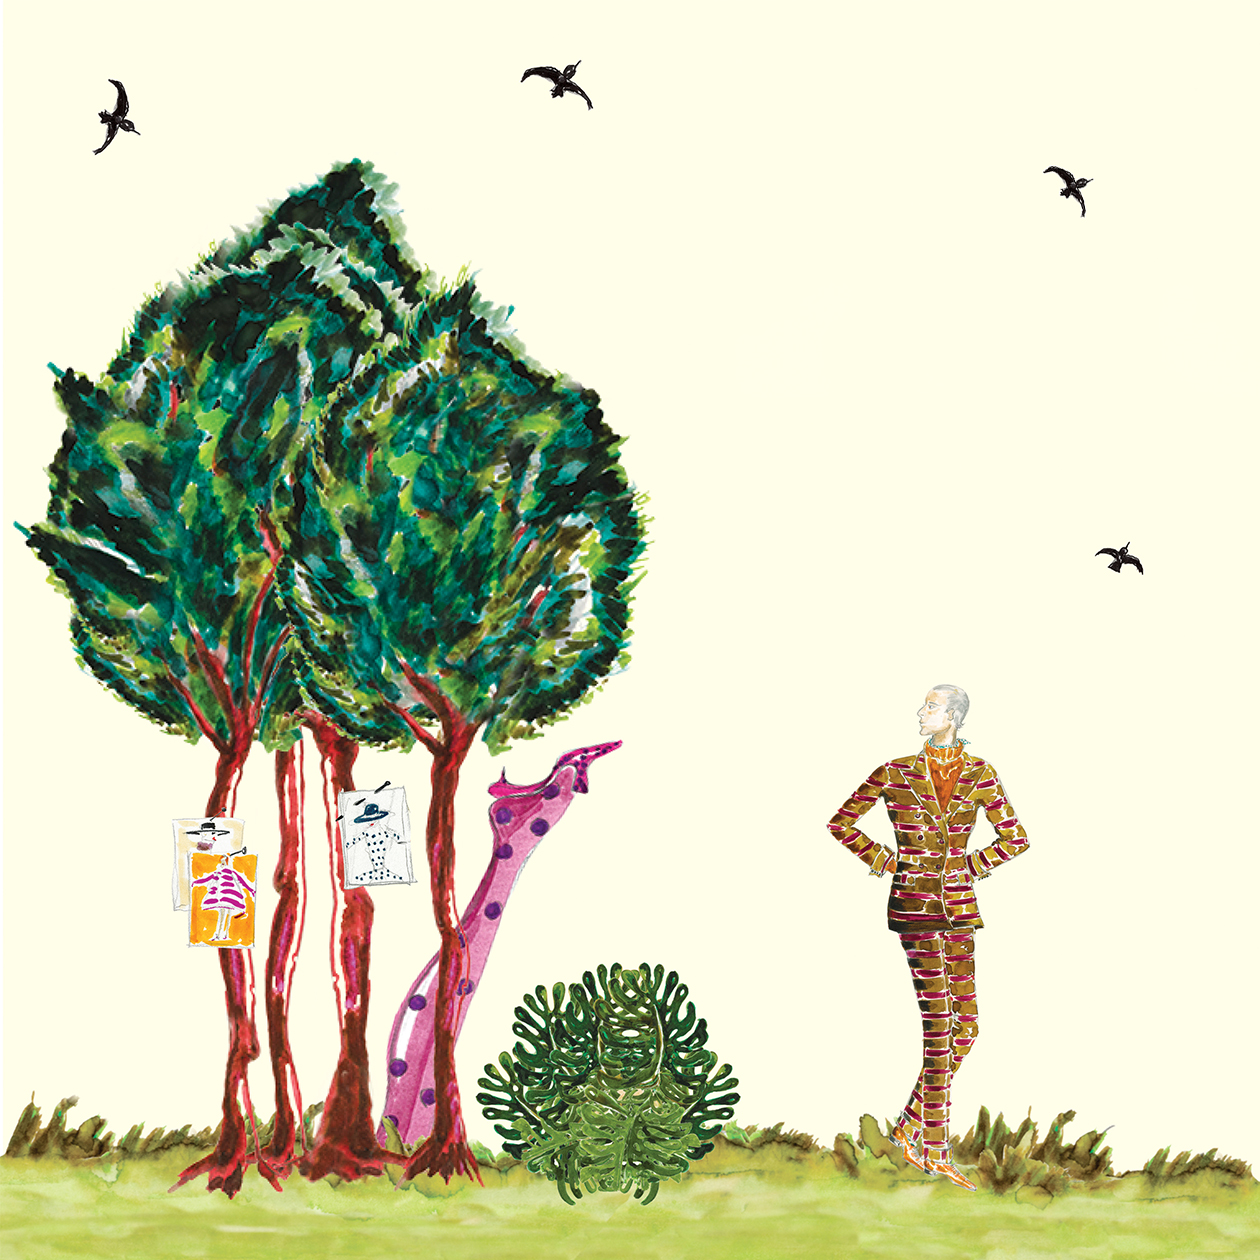 A sketch of Manolo Blahnik standing amongst some trees and grass